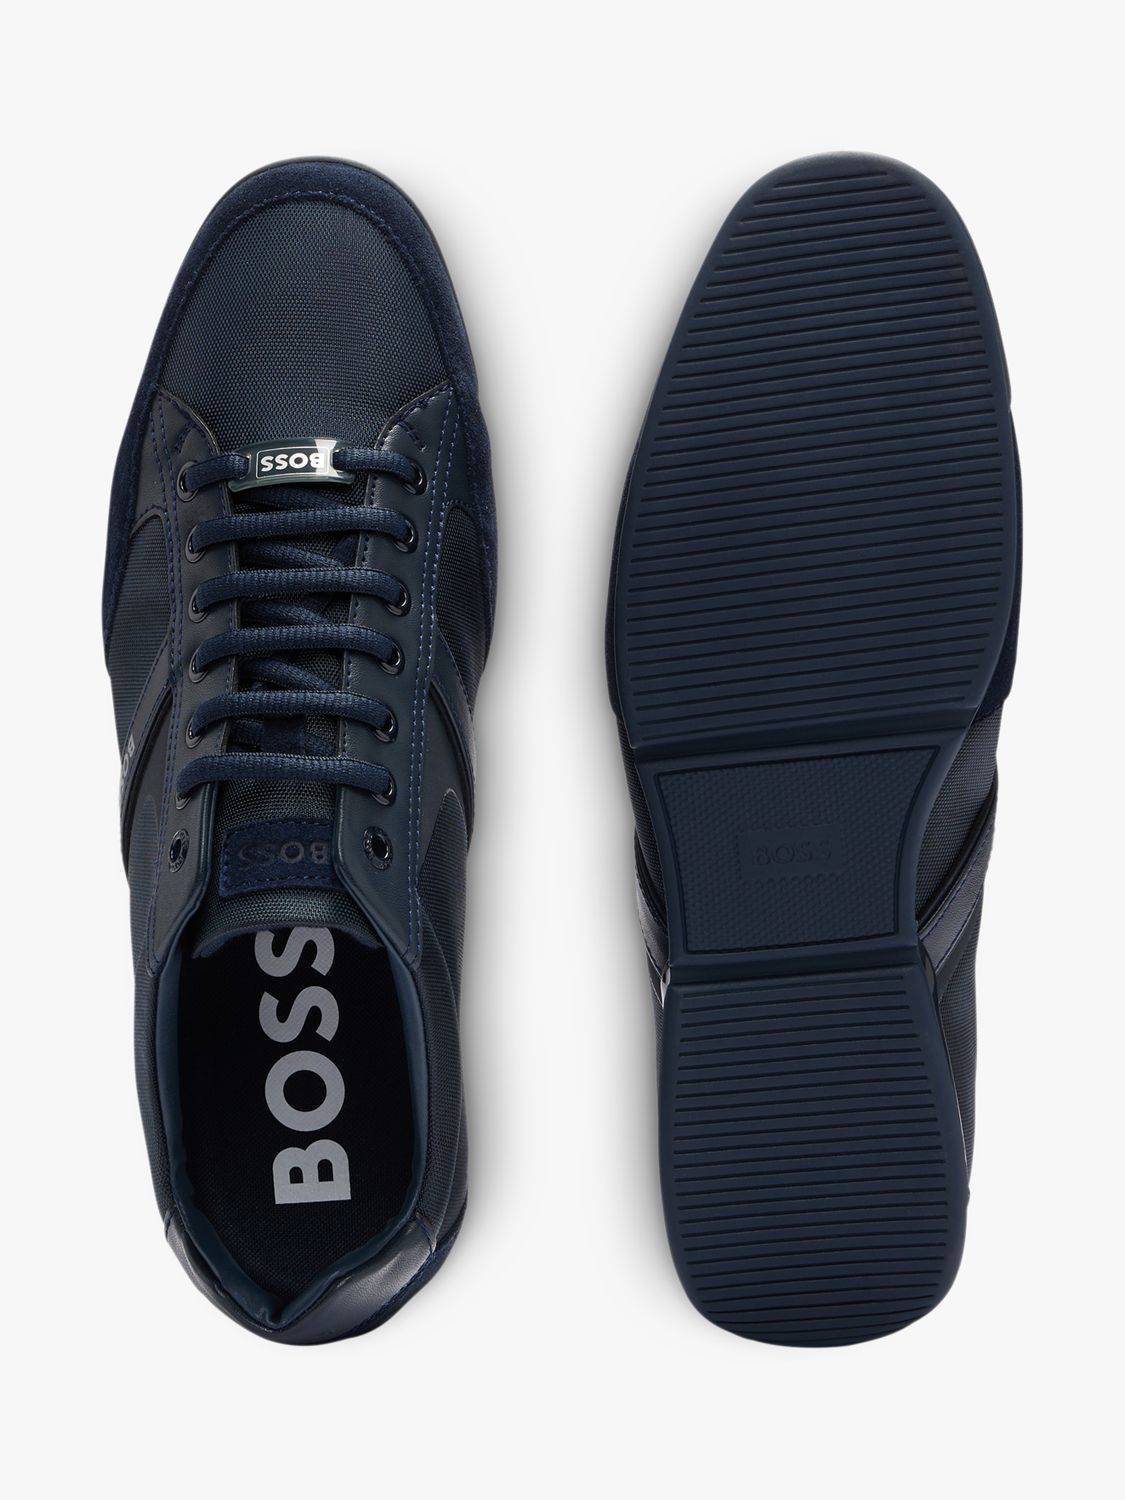 Buy HUGO BOSS Saturn 401 Lace Up Trainers, Dark Blue Online at johnlewis.com